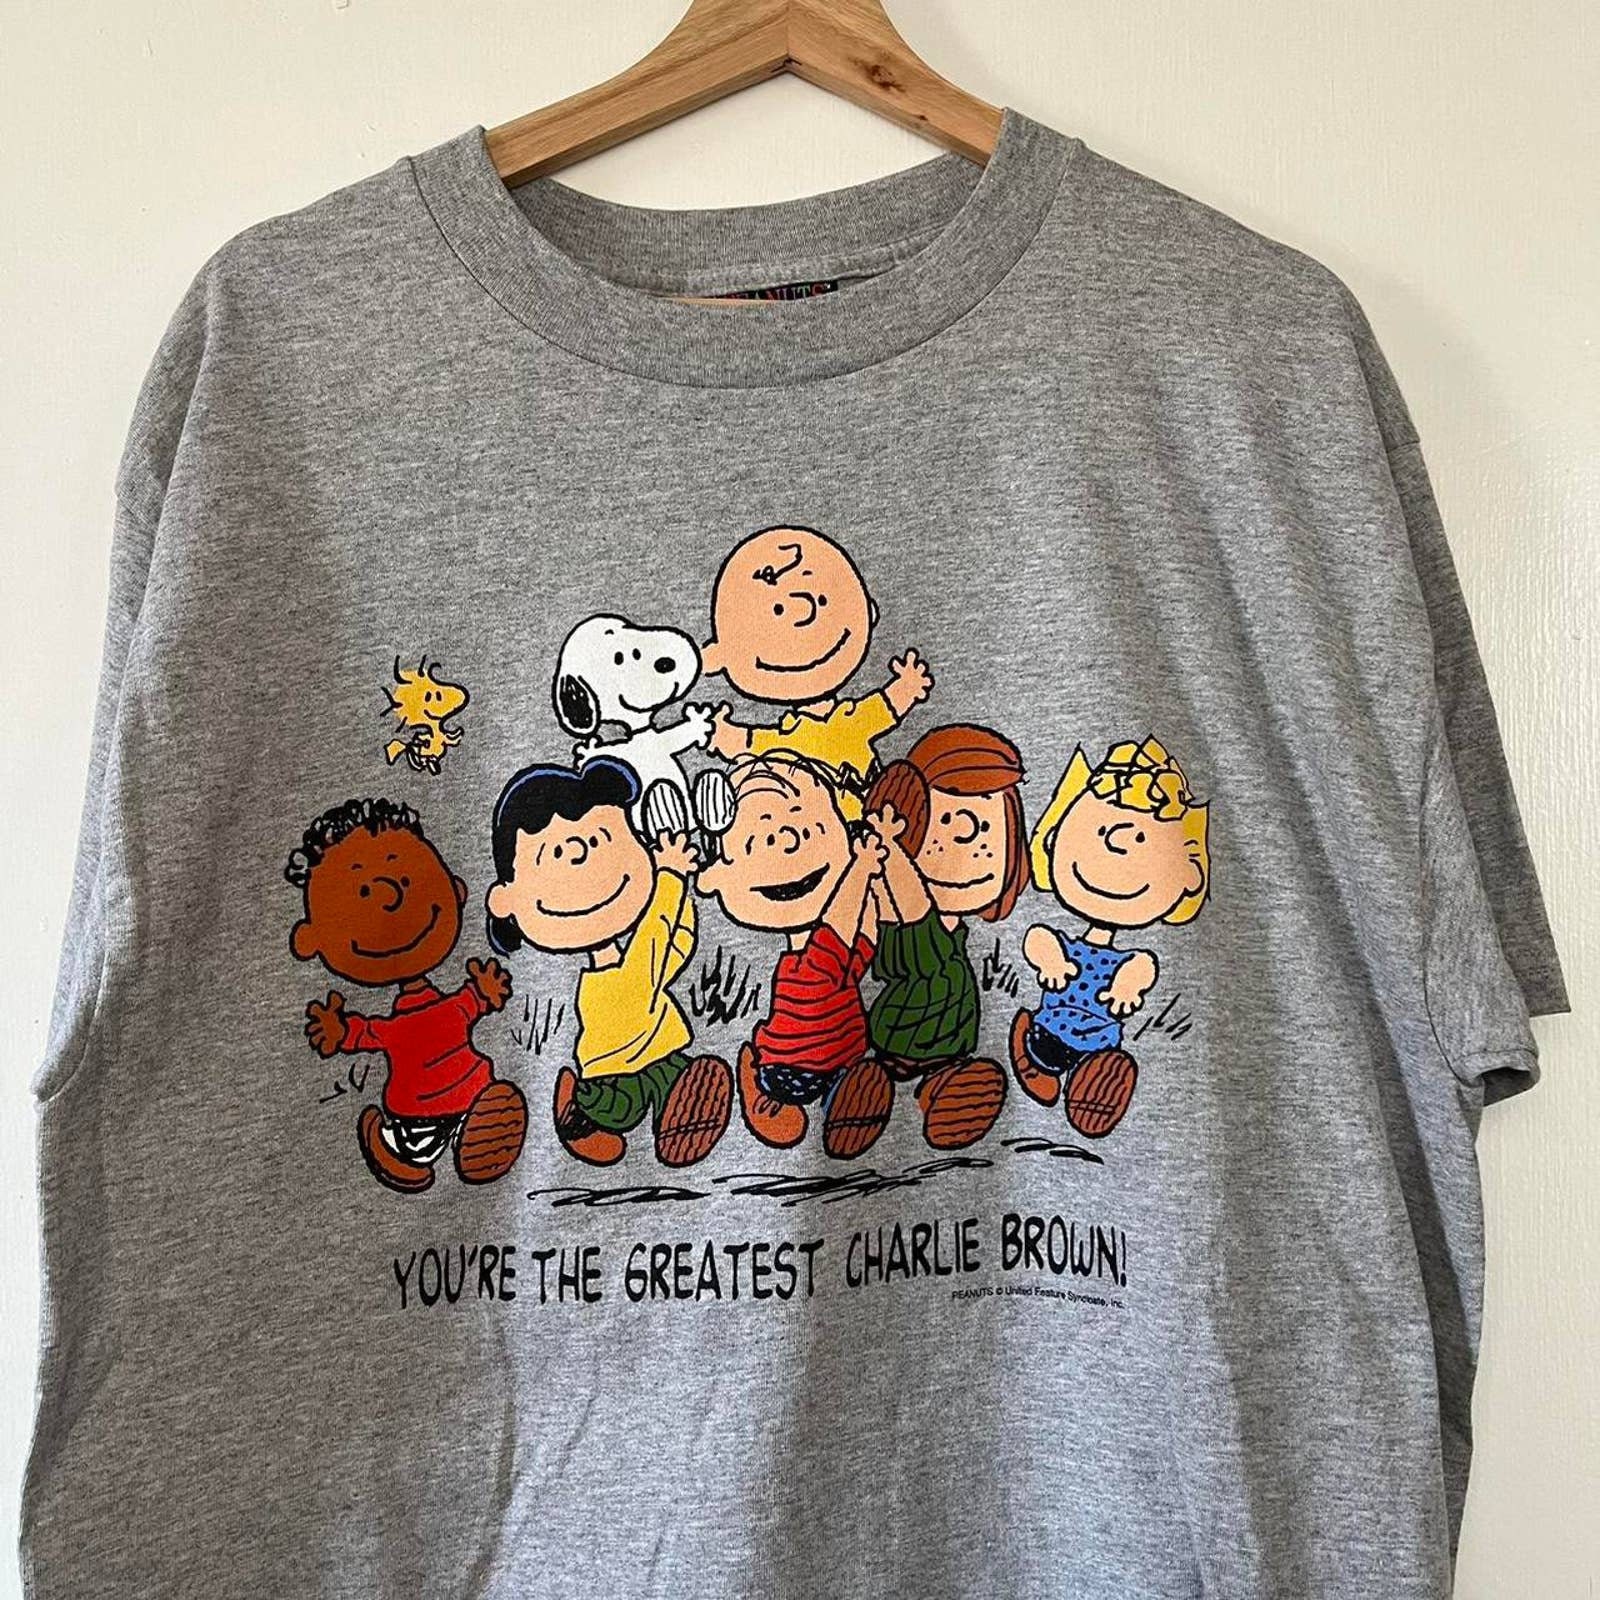 Discover Vintage 90s DS peanuts charlie brown charles schulze tee